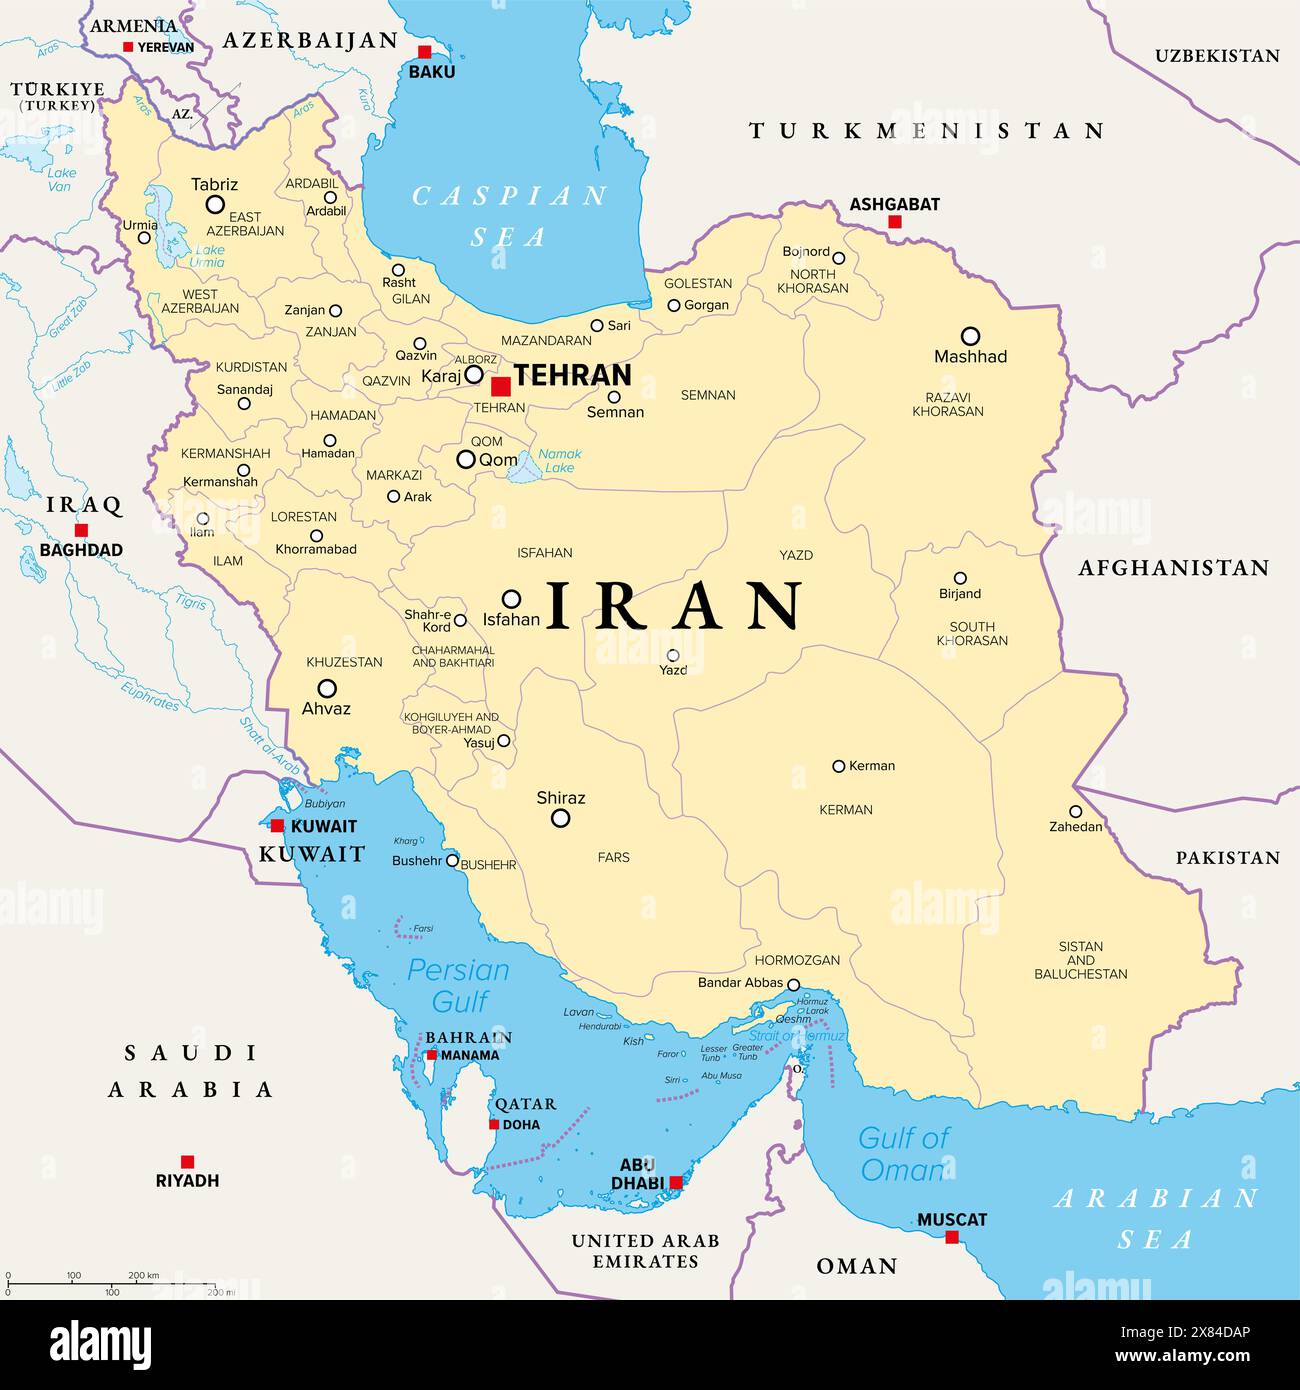 Iran, political map with provinces, borders, capital Tehran and major cities. The Islamic Republic of Iran, IRI, also known as Persia. Stock Photo